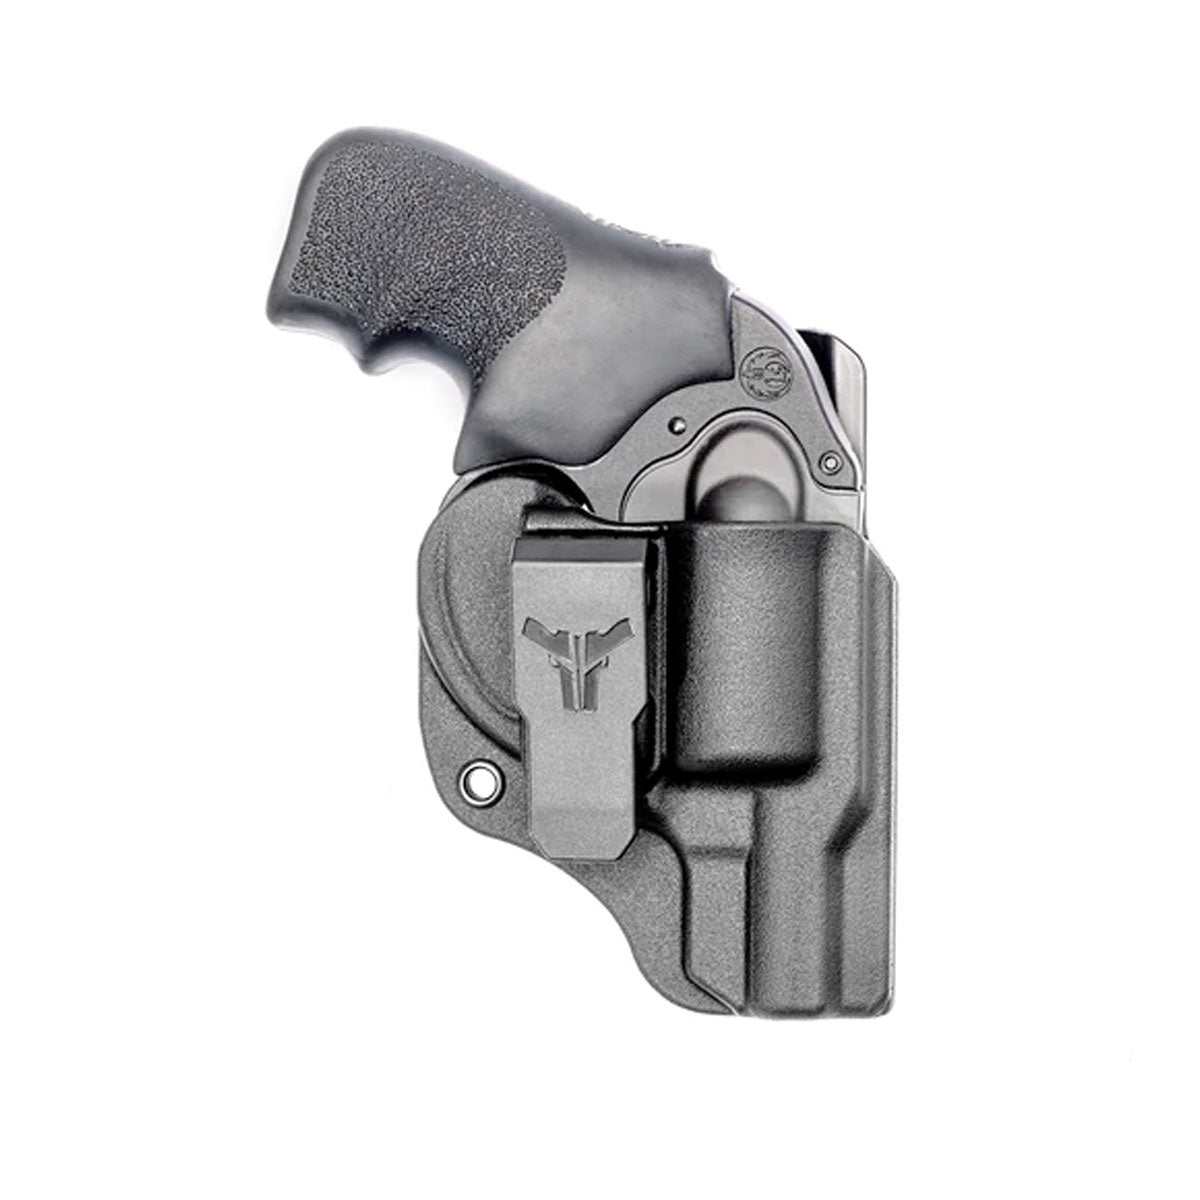 Blade-Tech Klipt IWB Holster Black Right Hand Only Holsters Blade-Tech Holsters Ruger LCR Tactical Gear Supplier Tactical Distributors Australia